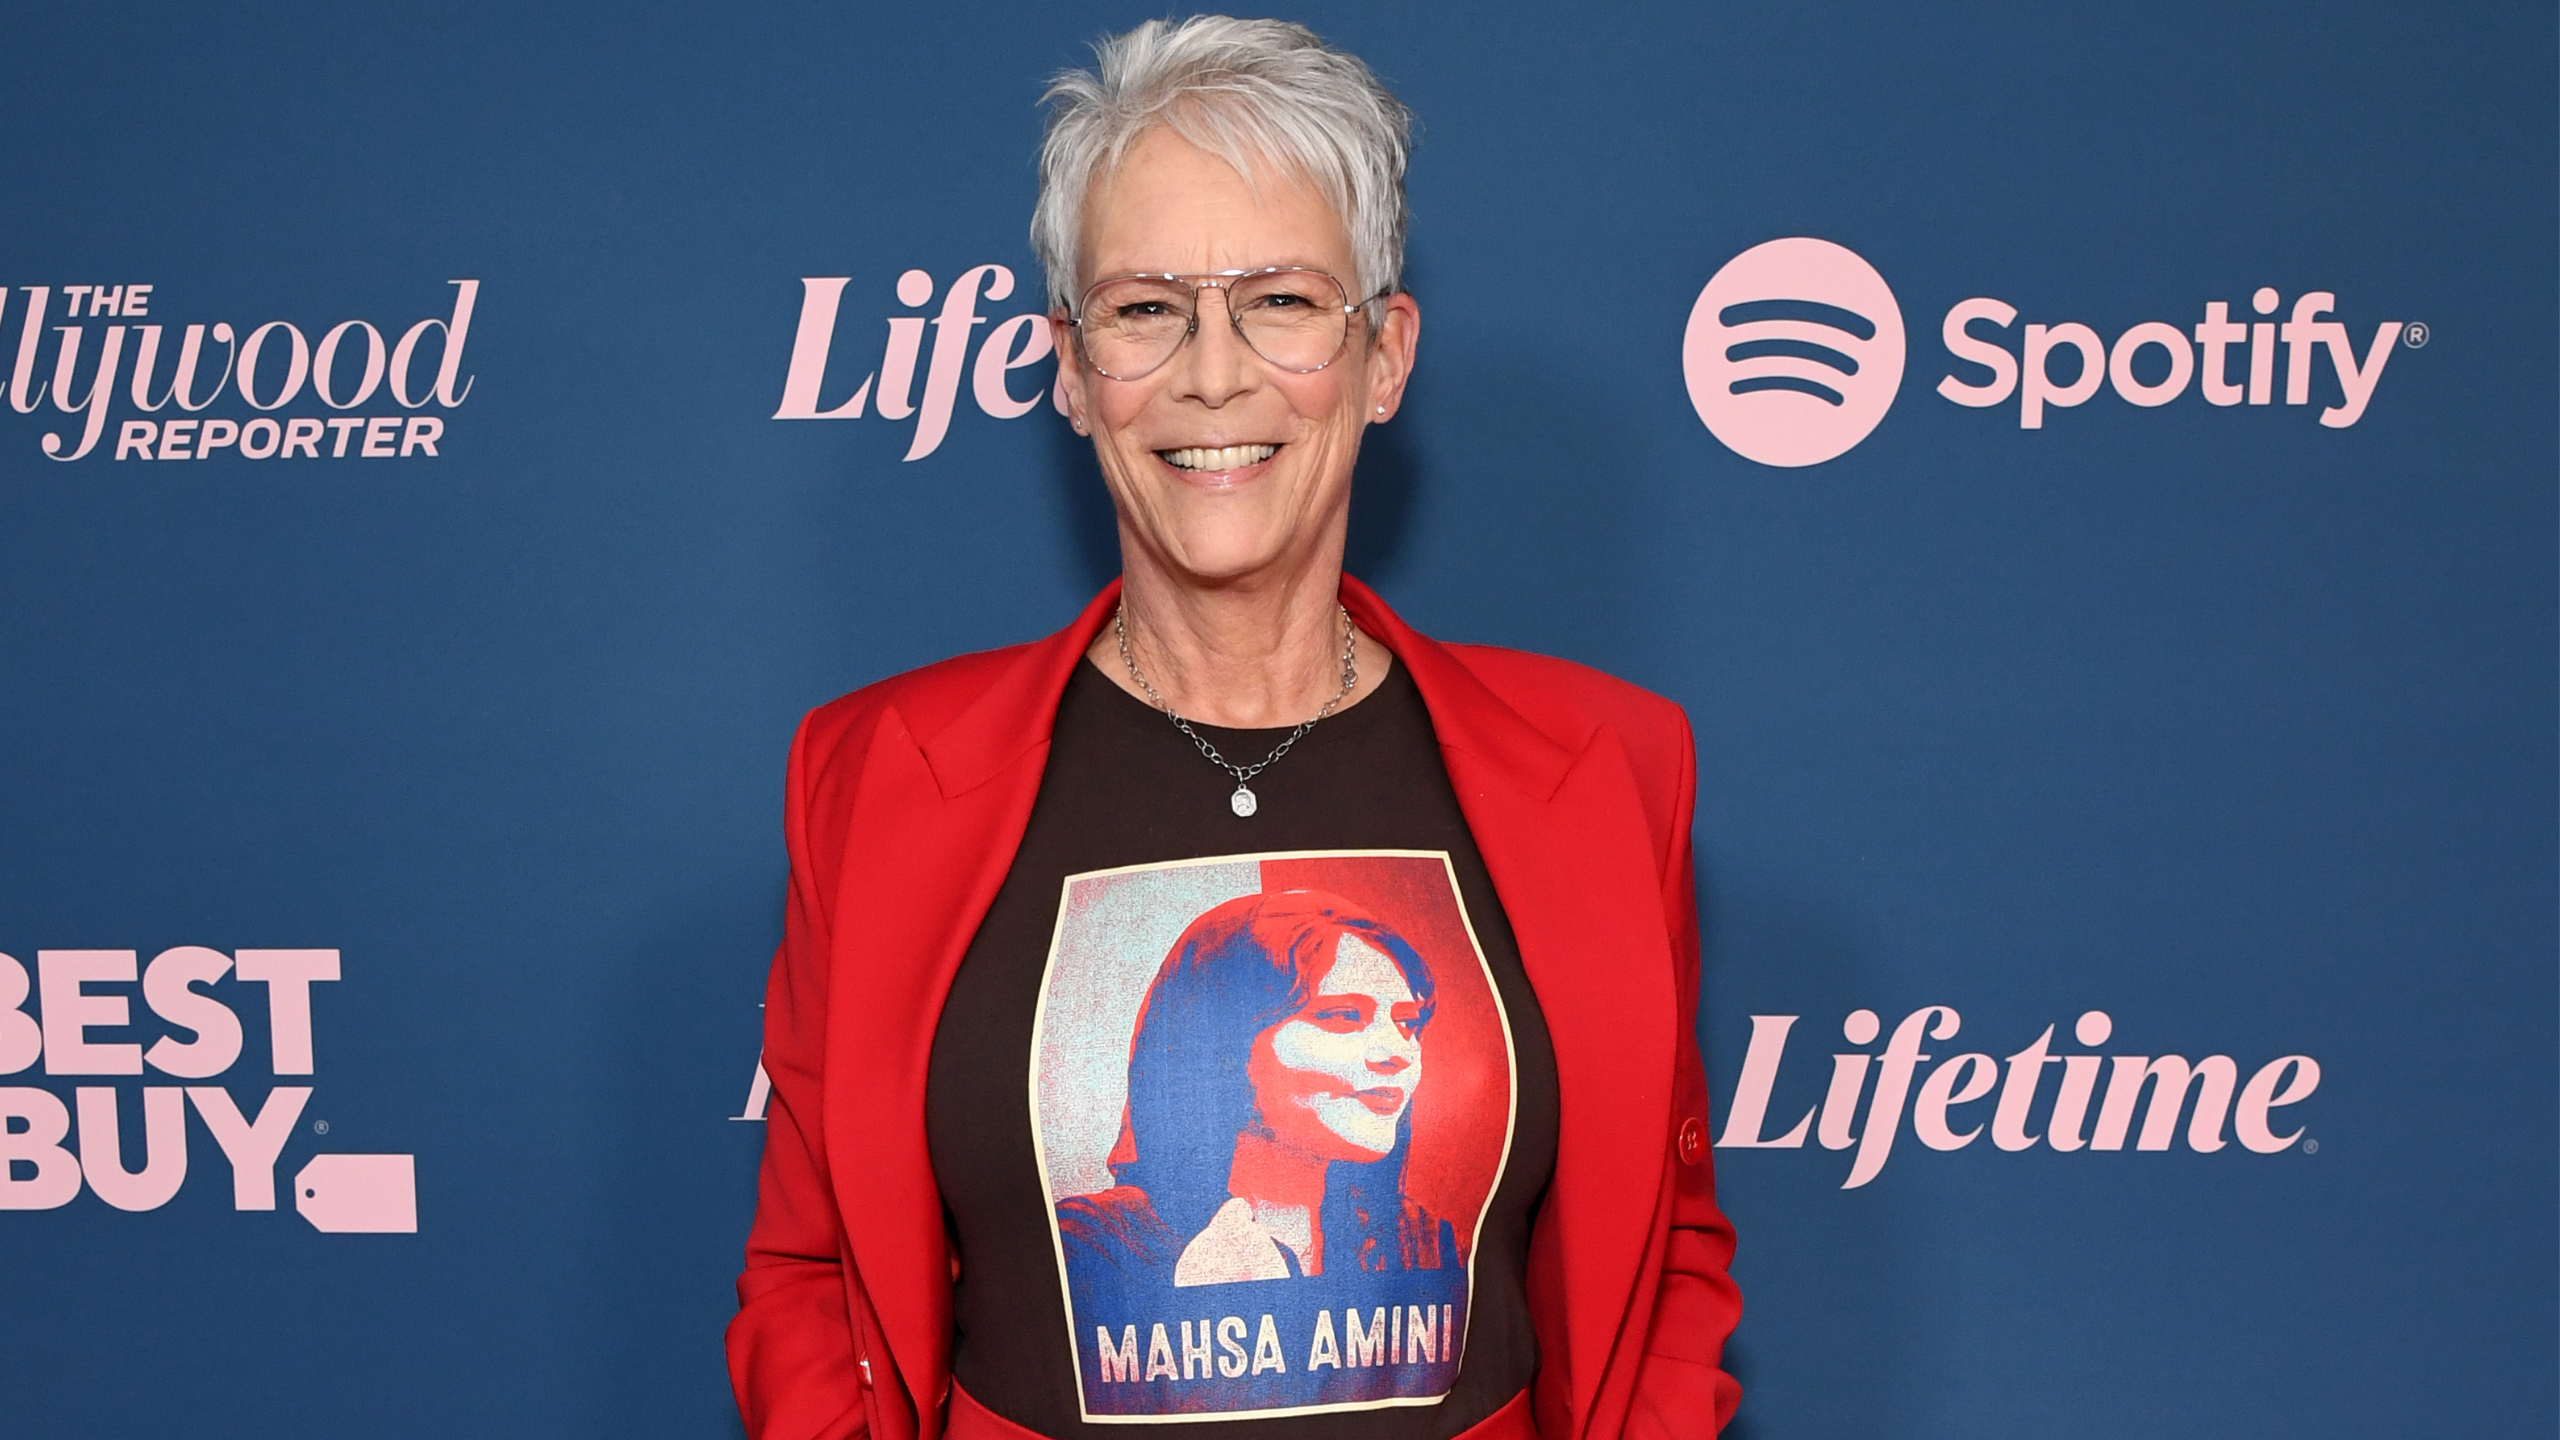 Jamie Lee Curtis Responds to NY Mag’s ‘Nepo Baby’ Story: Debate Designed to ‘Denigrate and Hurt’